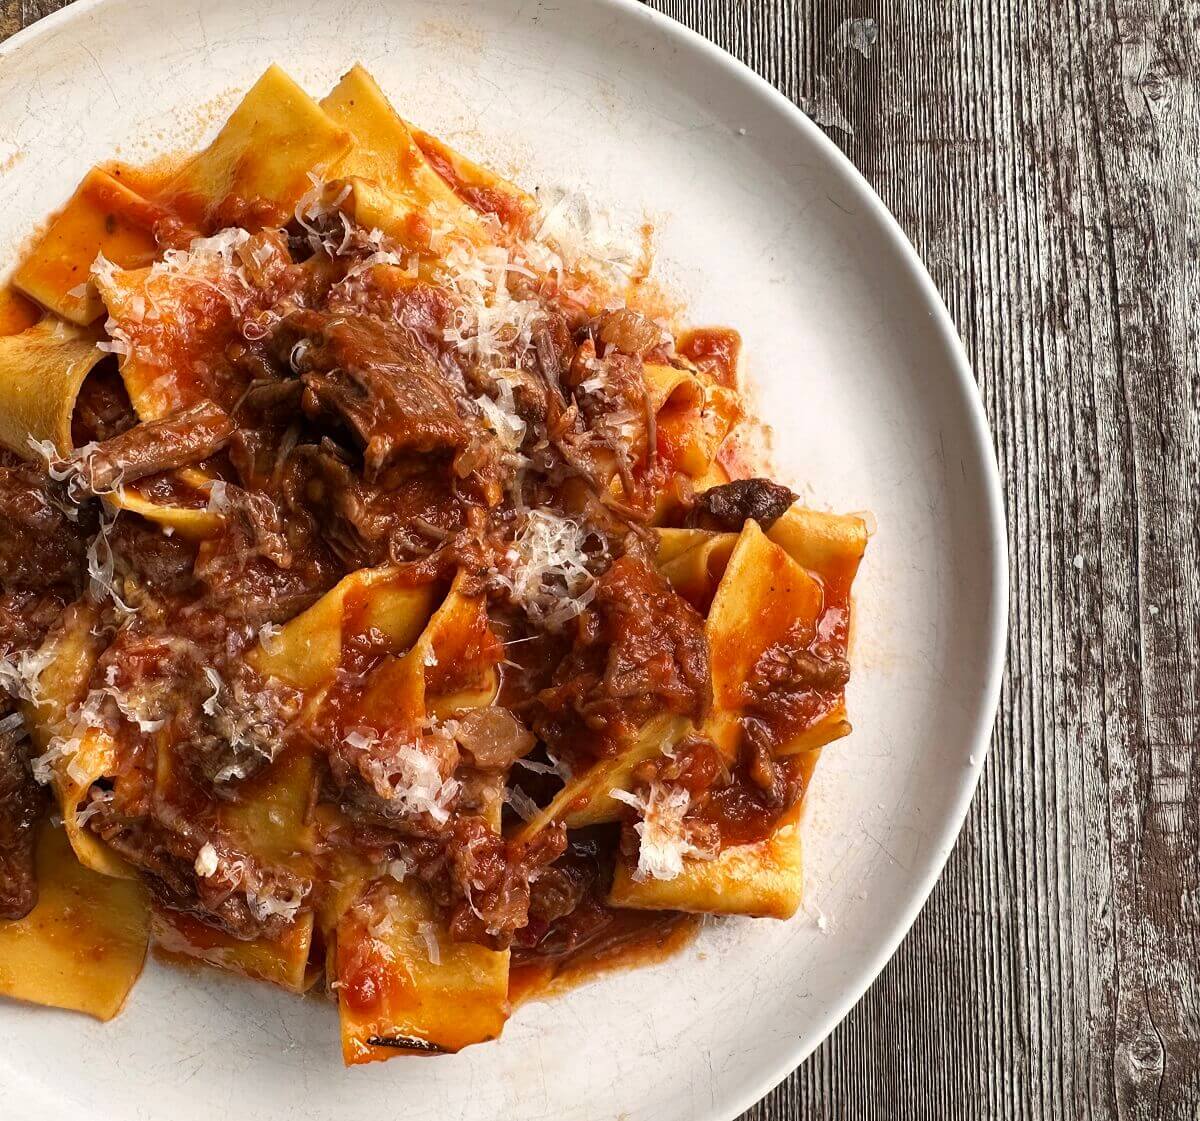 Recipe for Pappardelle with Beef Short Rib Ragu